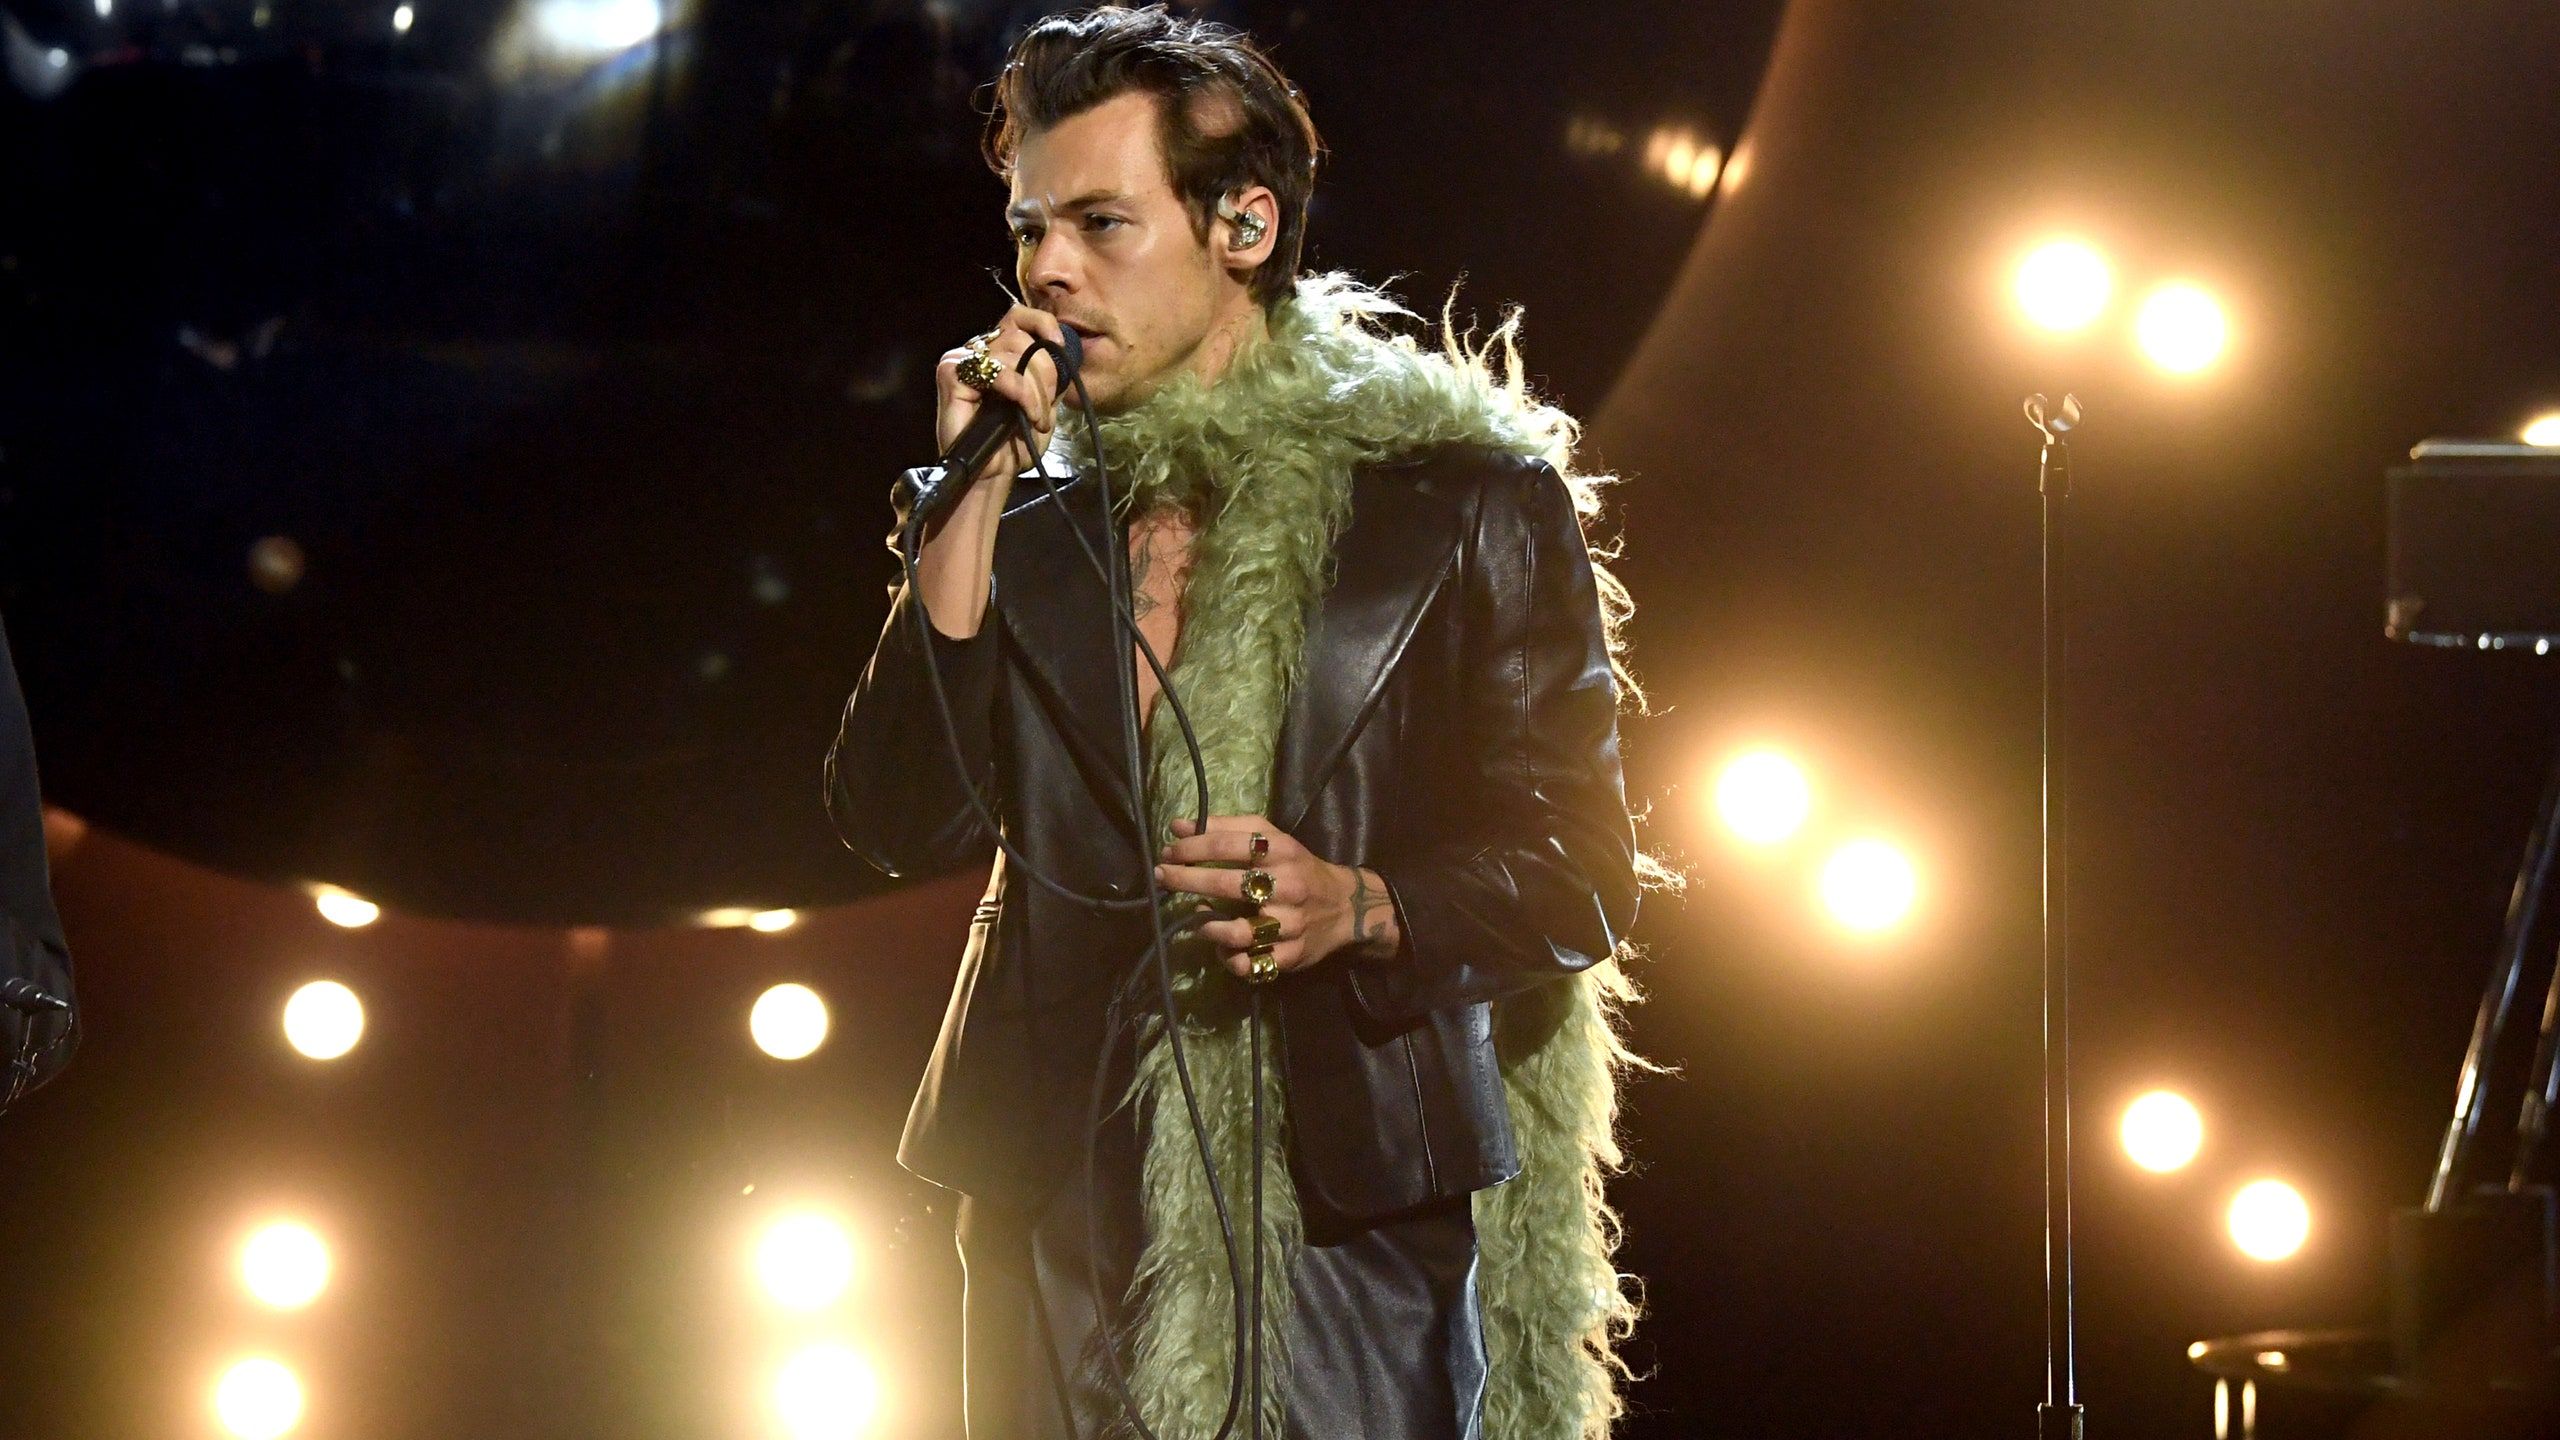 Grammys 2021: Harry Styles Served Major Internet Boyfriend Vibes During His Performance